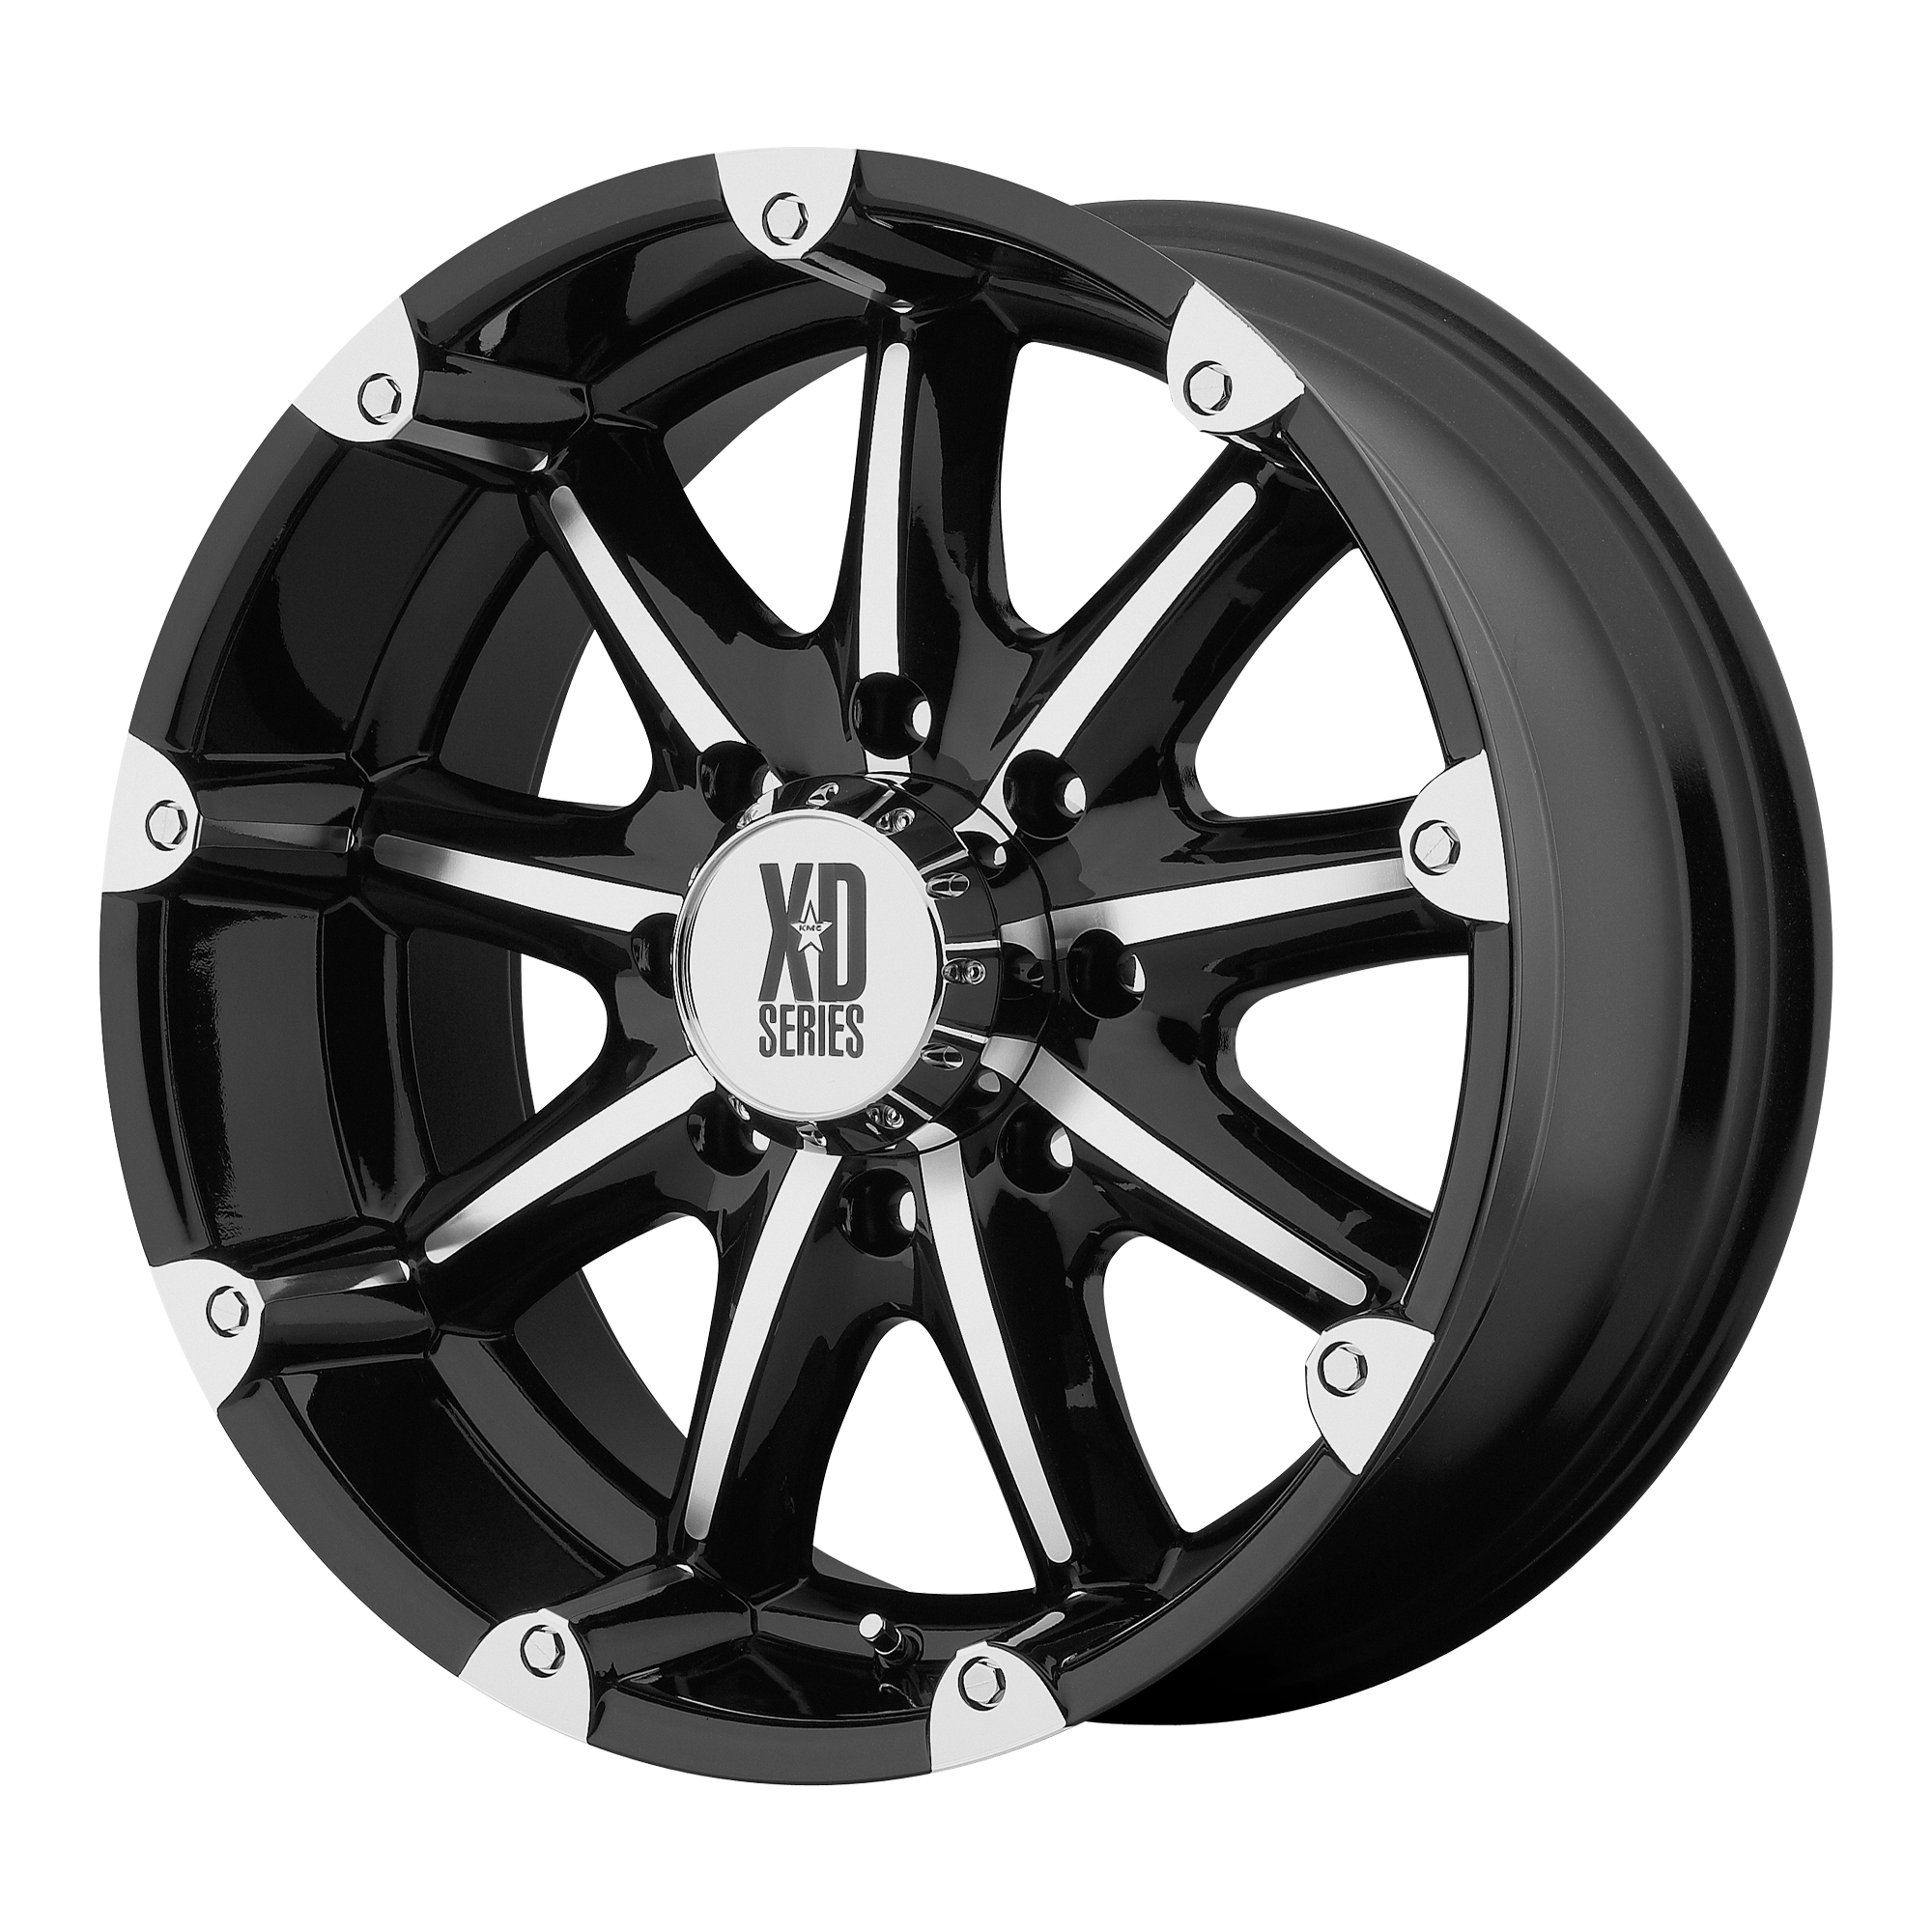 BADLANDS 20x9 6x135.00 GLOSS BLACK MACHINED (18 mm) - Tires and Engine Performance